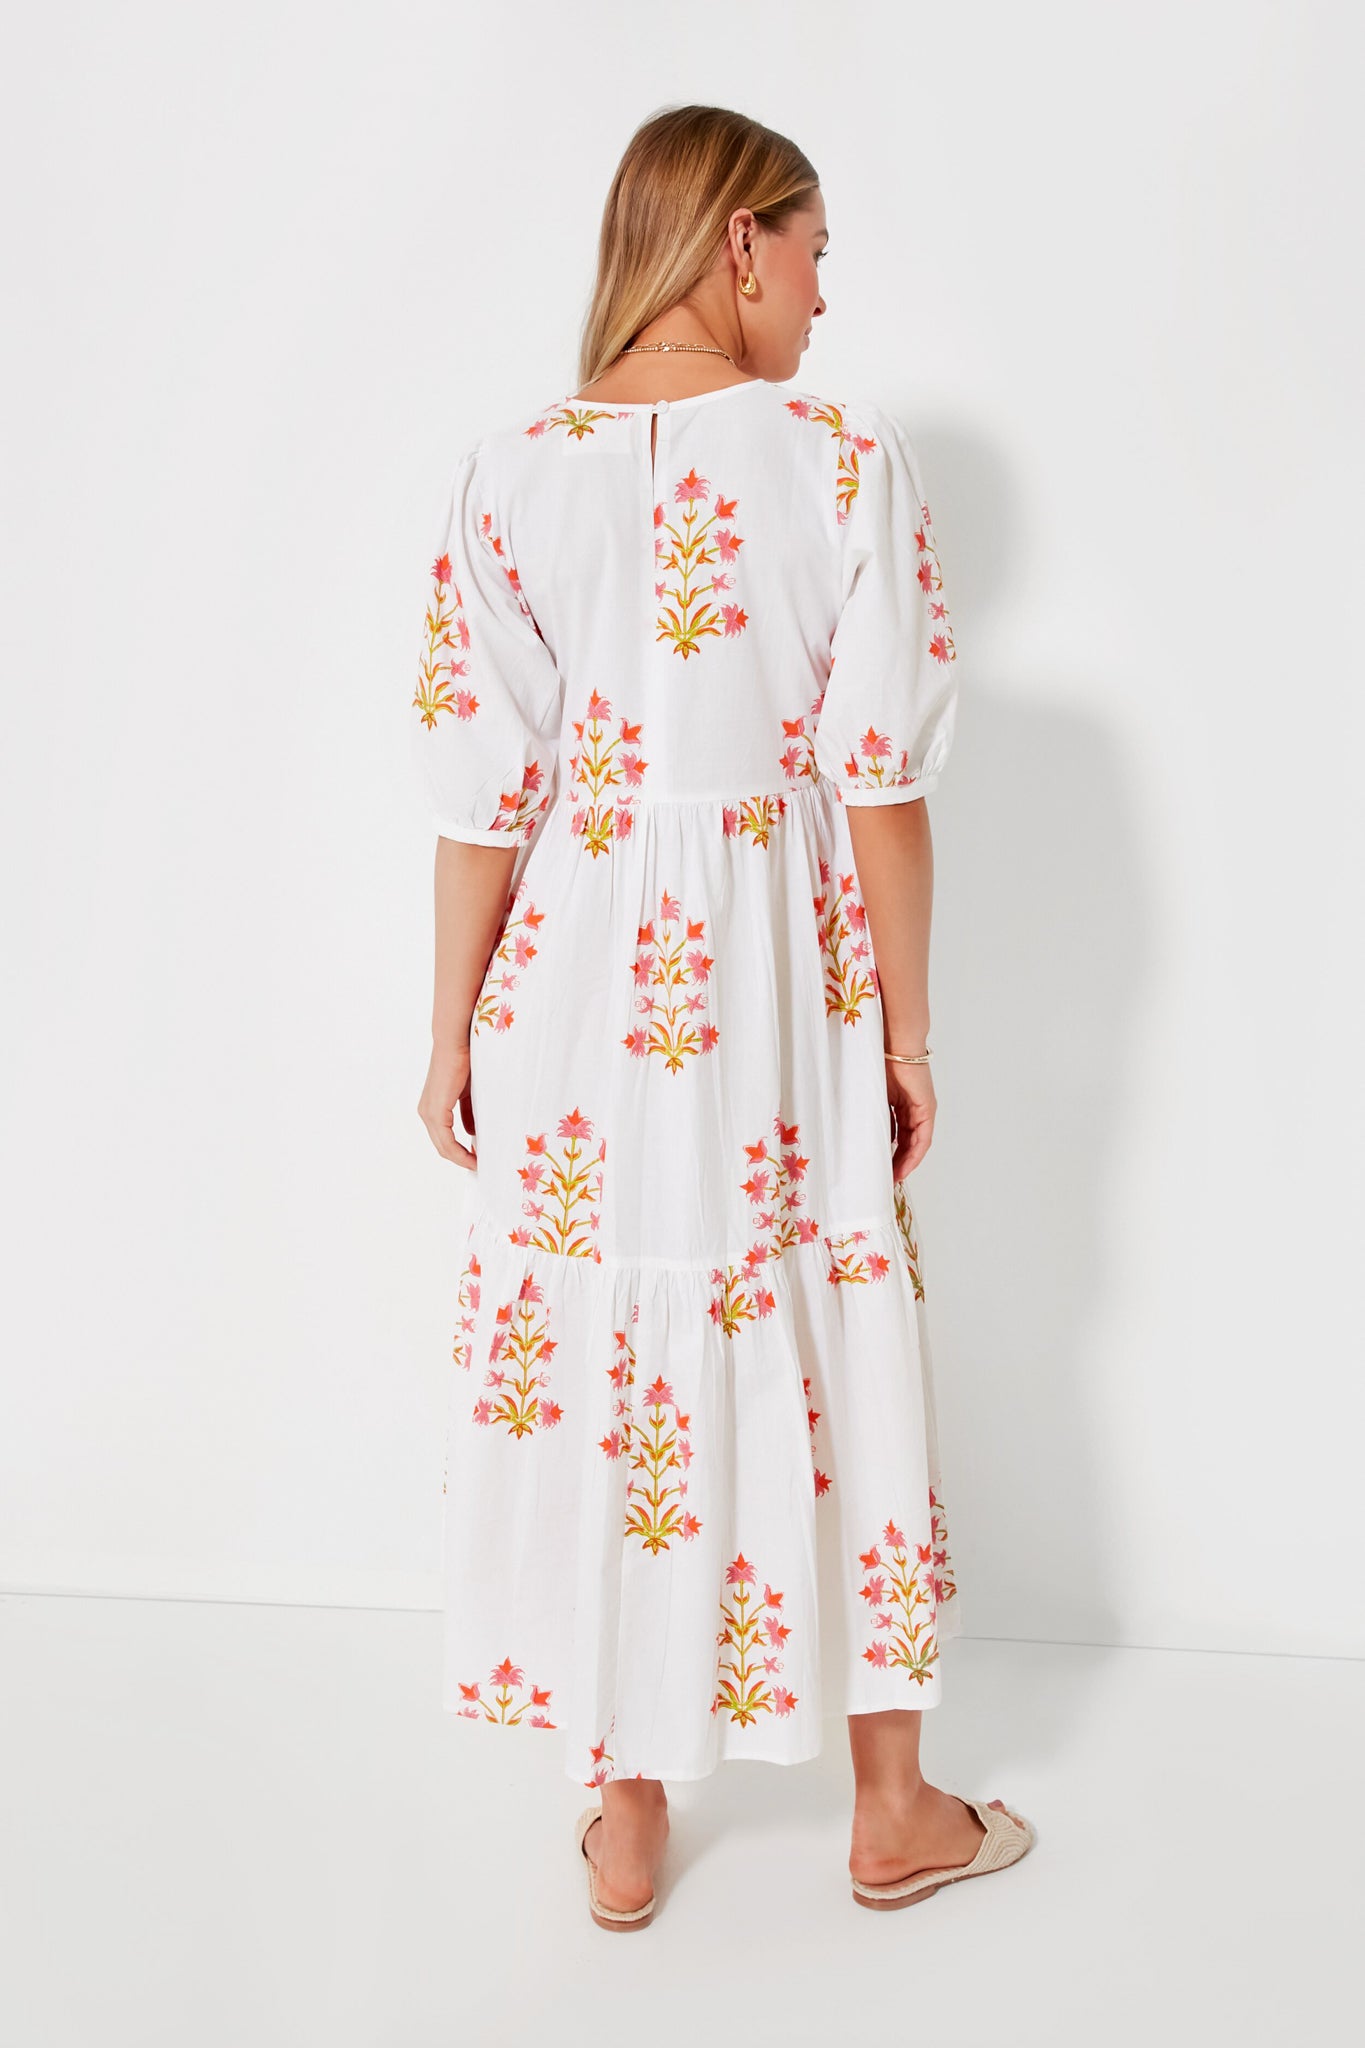 Exclusive Soft Rose and Tangerine Lily Print Gaia Dress